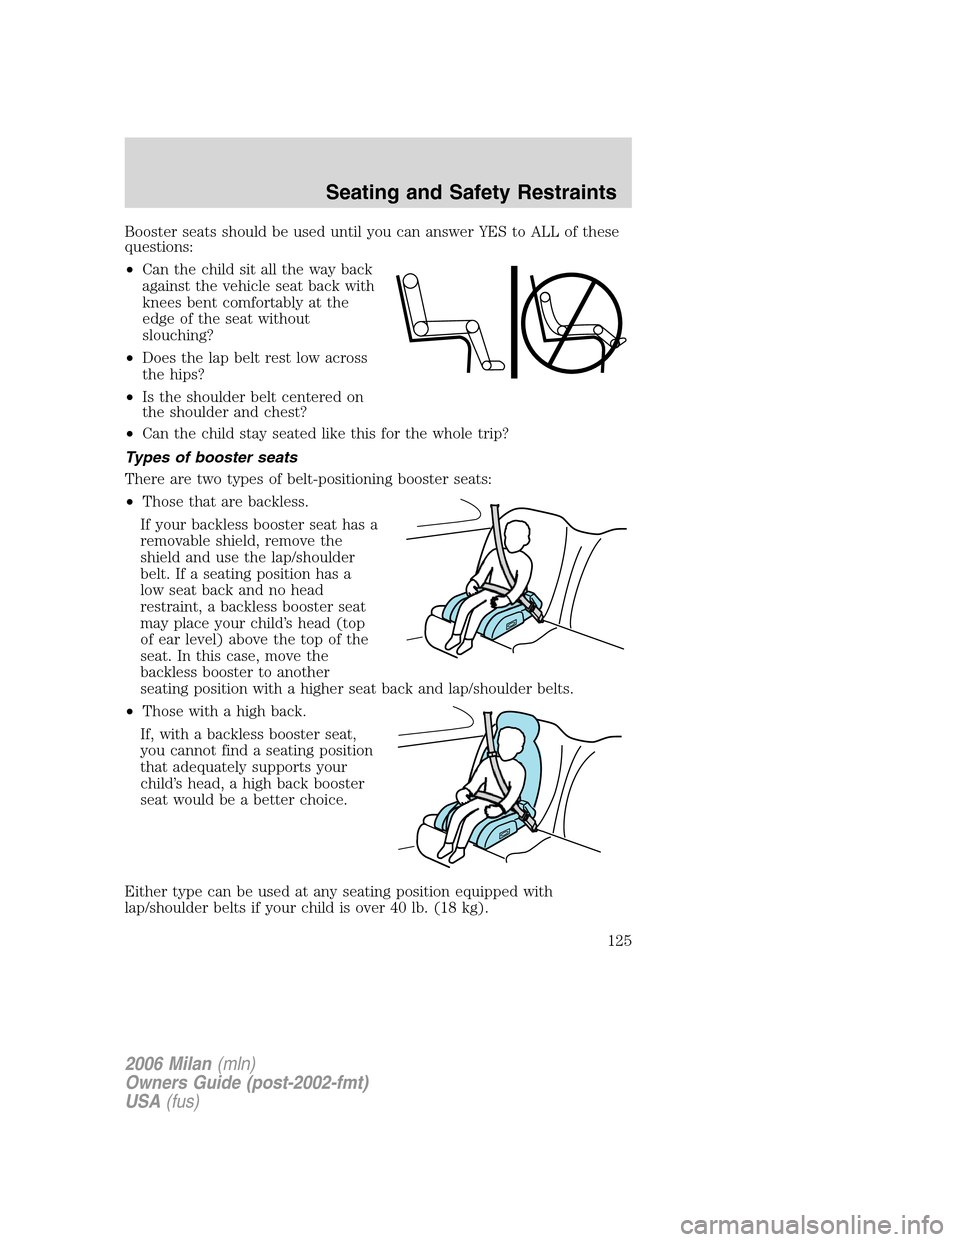 Mercury Milan 2006  s User Guide Booster seats should be used until you can answer YES to ALL of these
questions:
•Can the child sit all the way back
against the vehicle seat back with
knees bent comfortably at the
edge of the seat